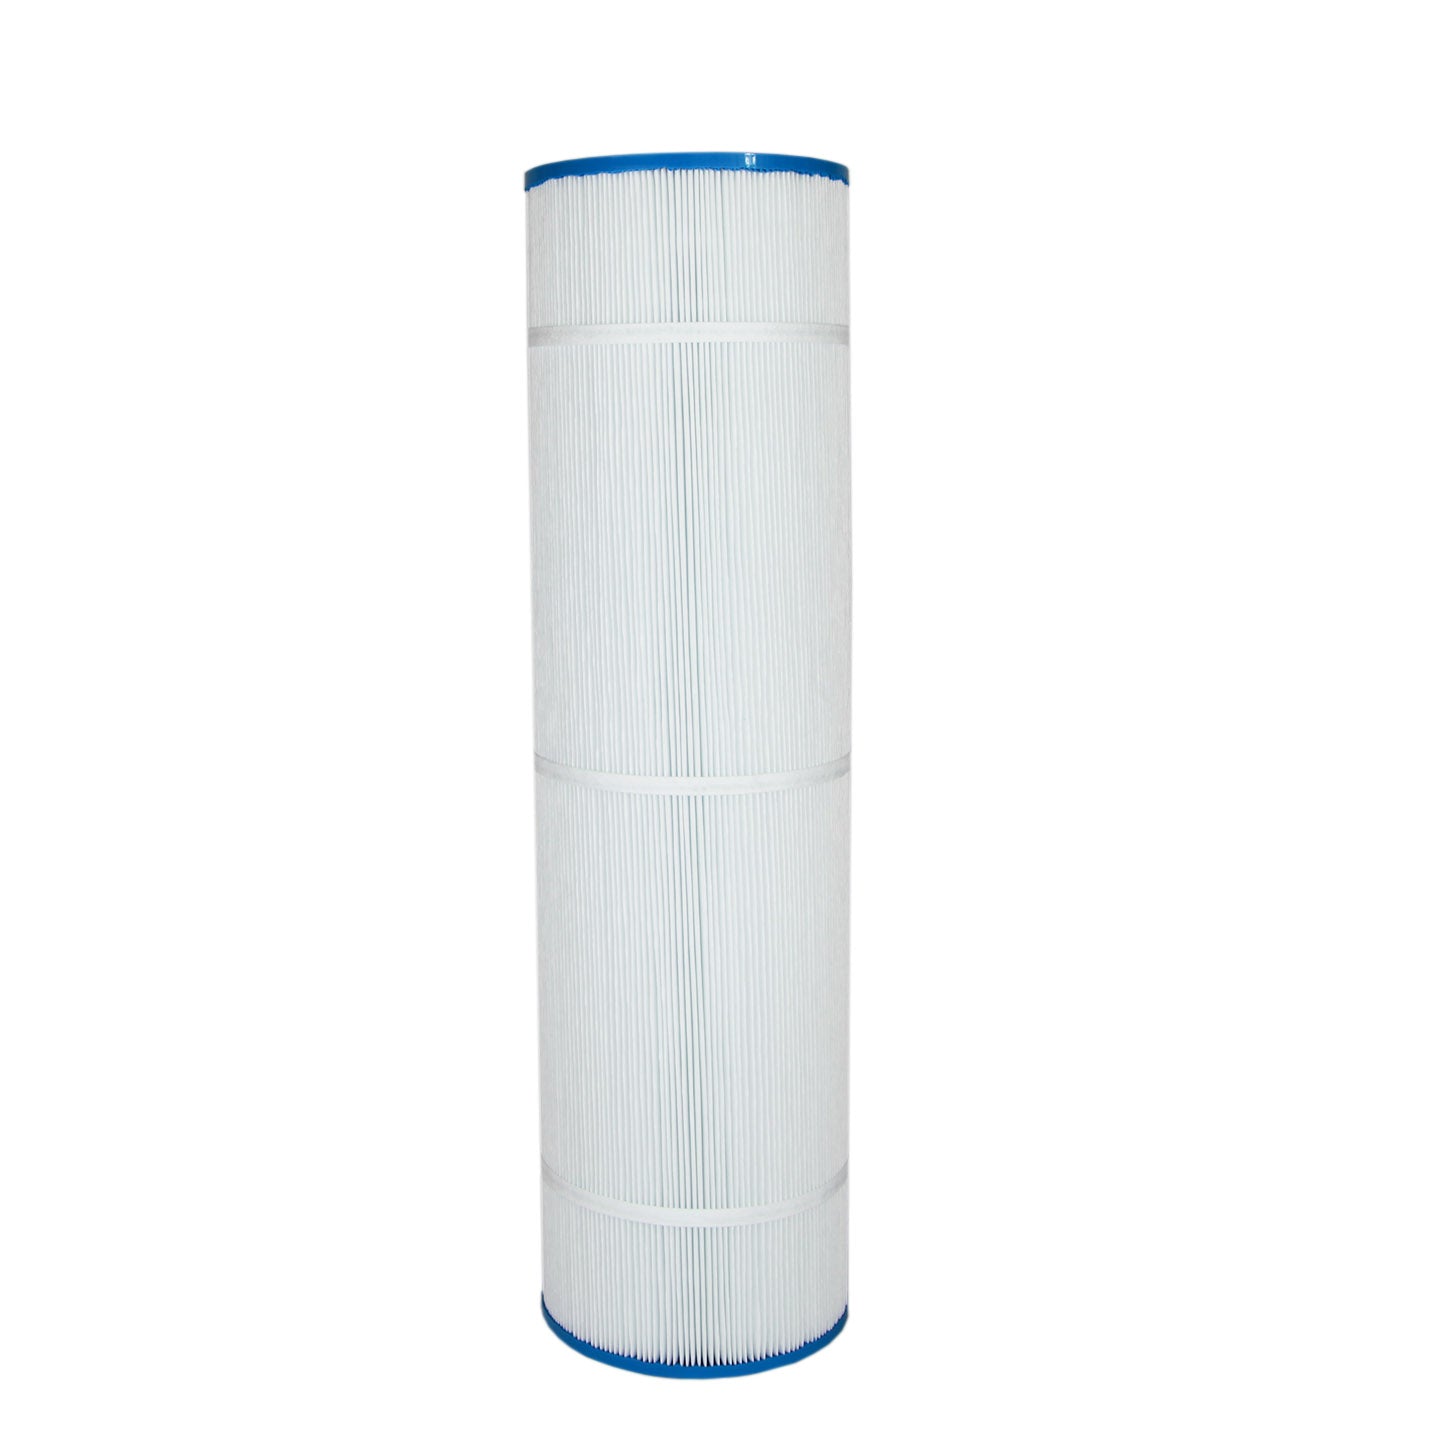 Tier1 Brand Replacement Pool and Spa Filter for CX870-XRE